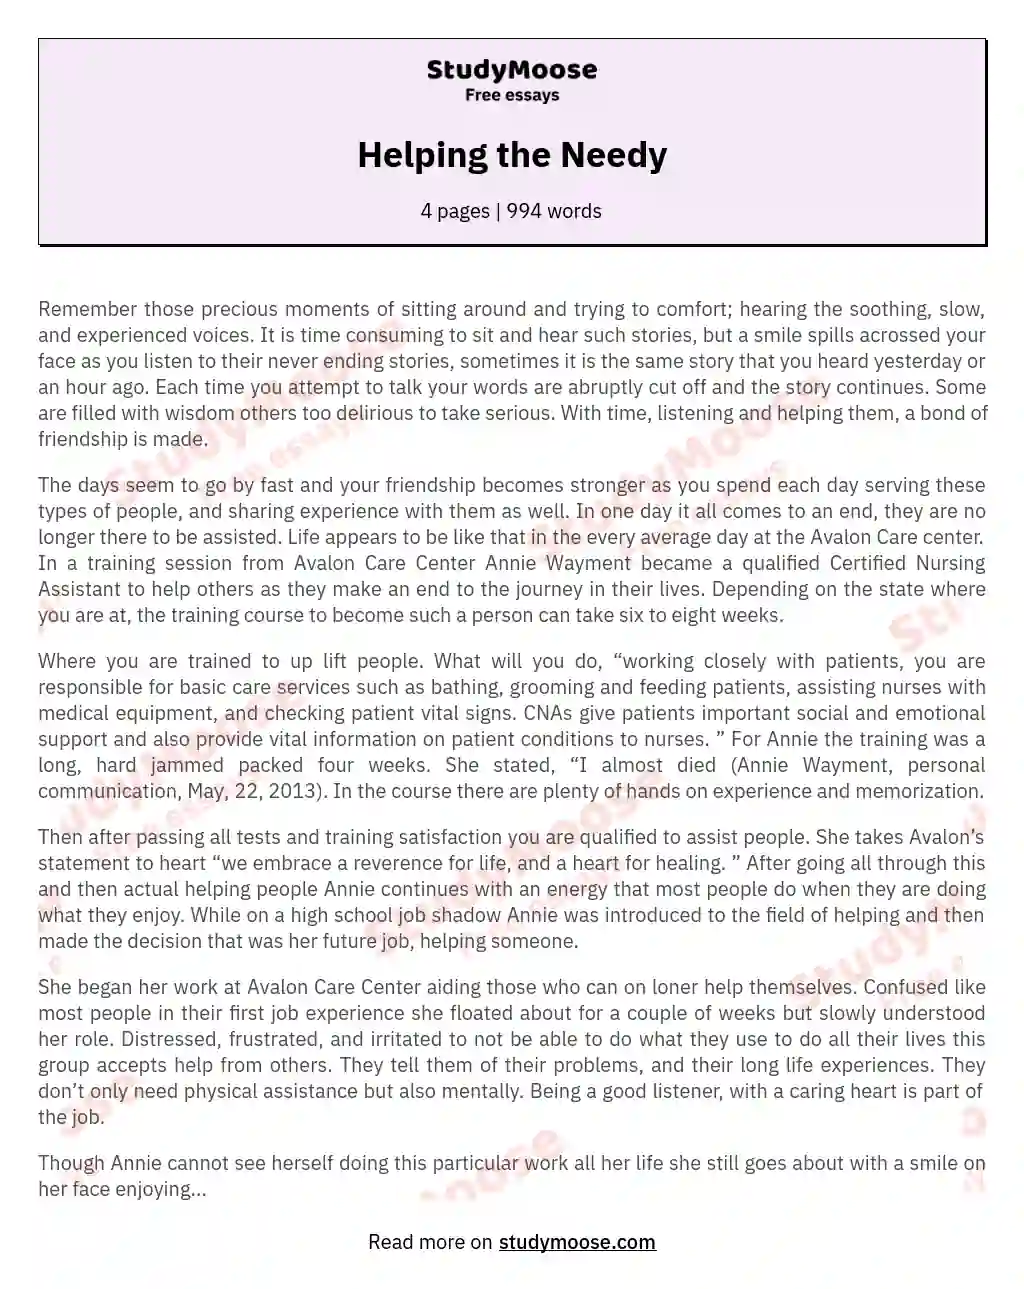 narrative essay about helping a friend in need